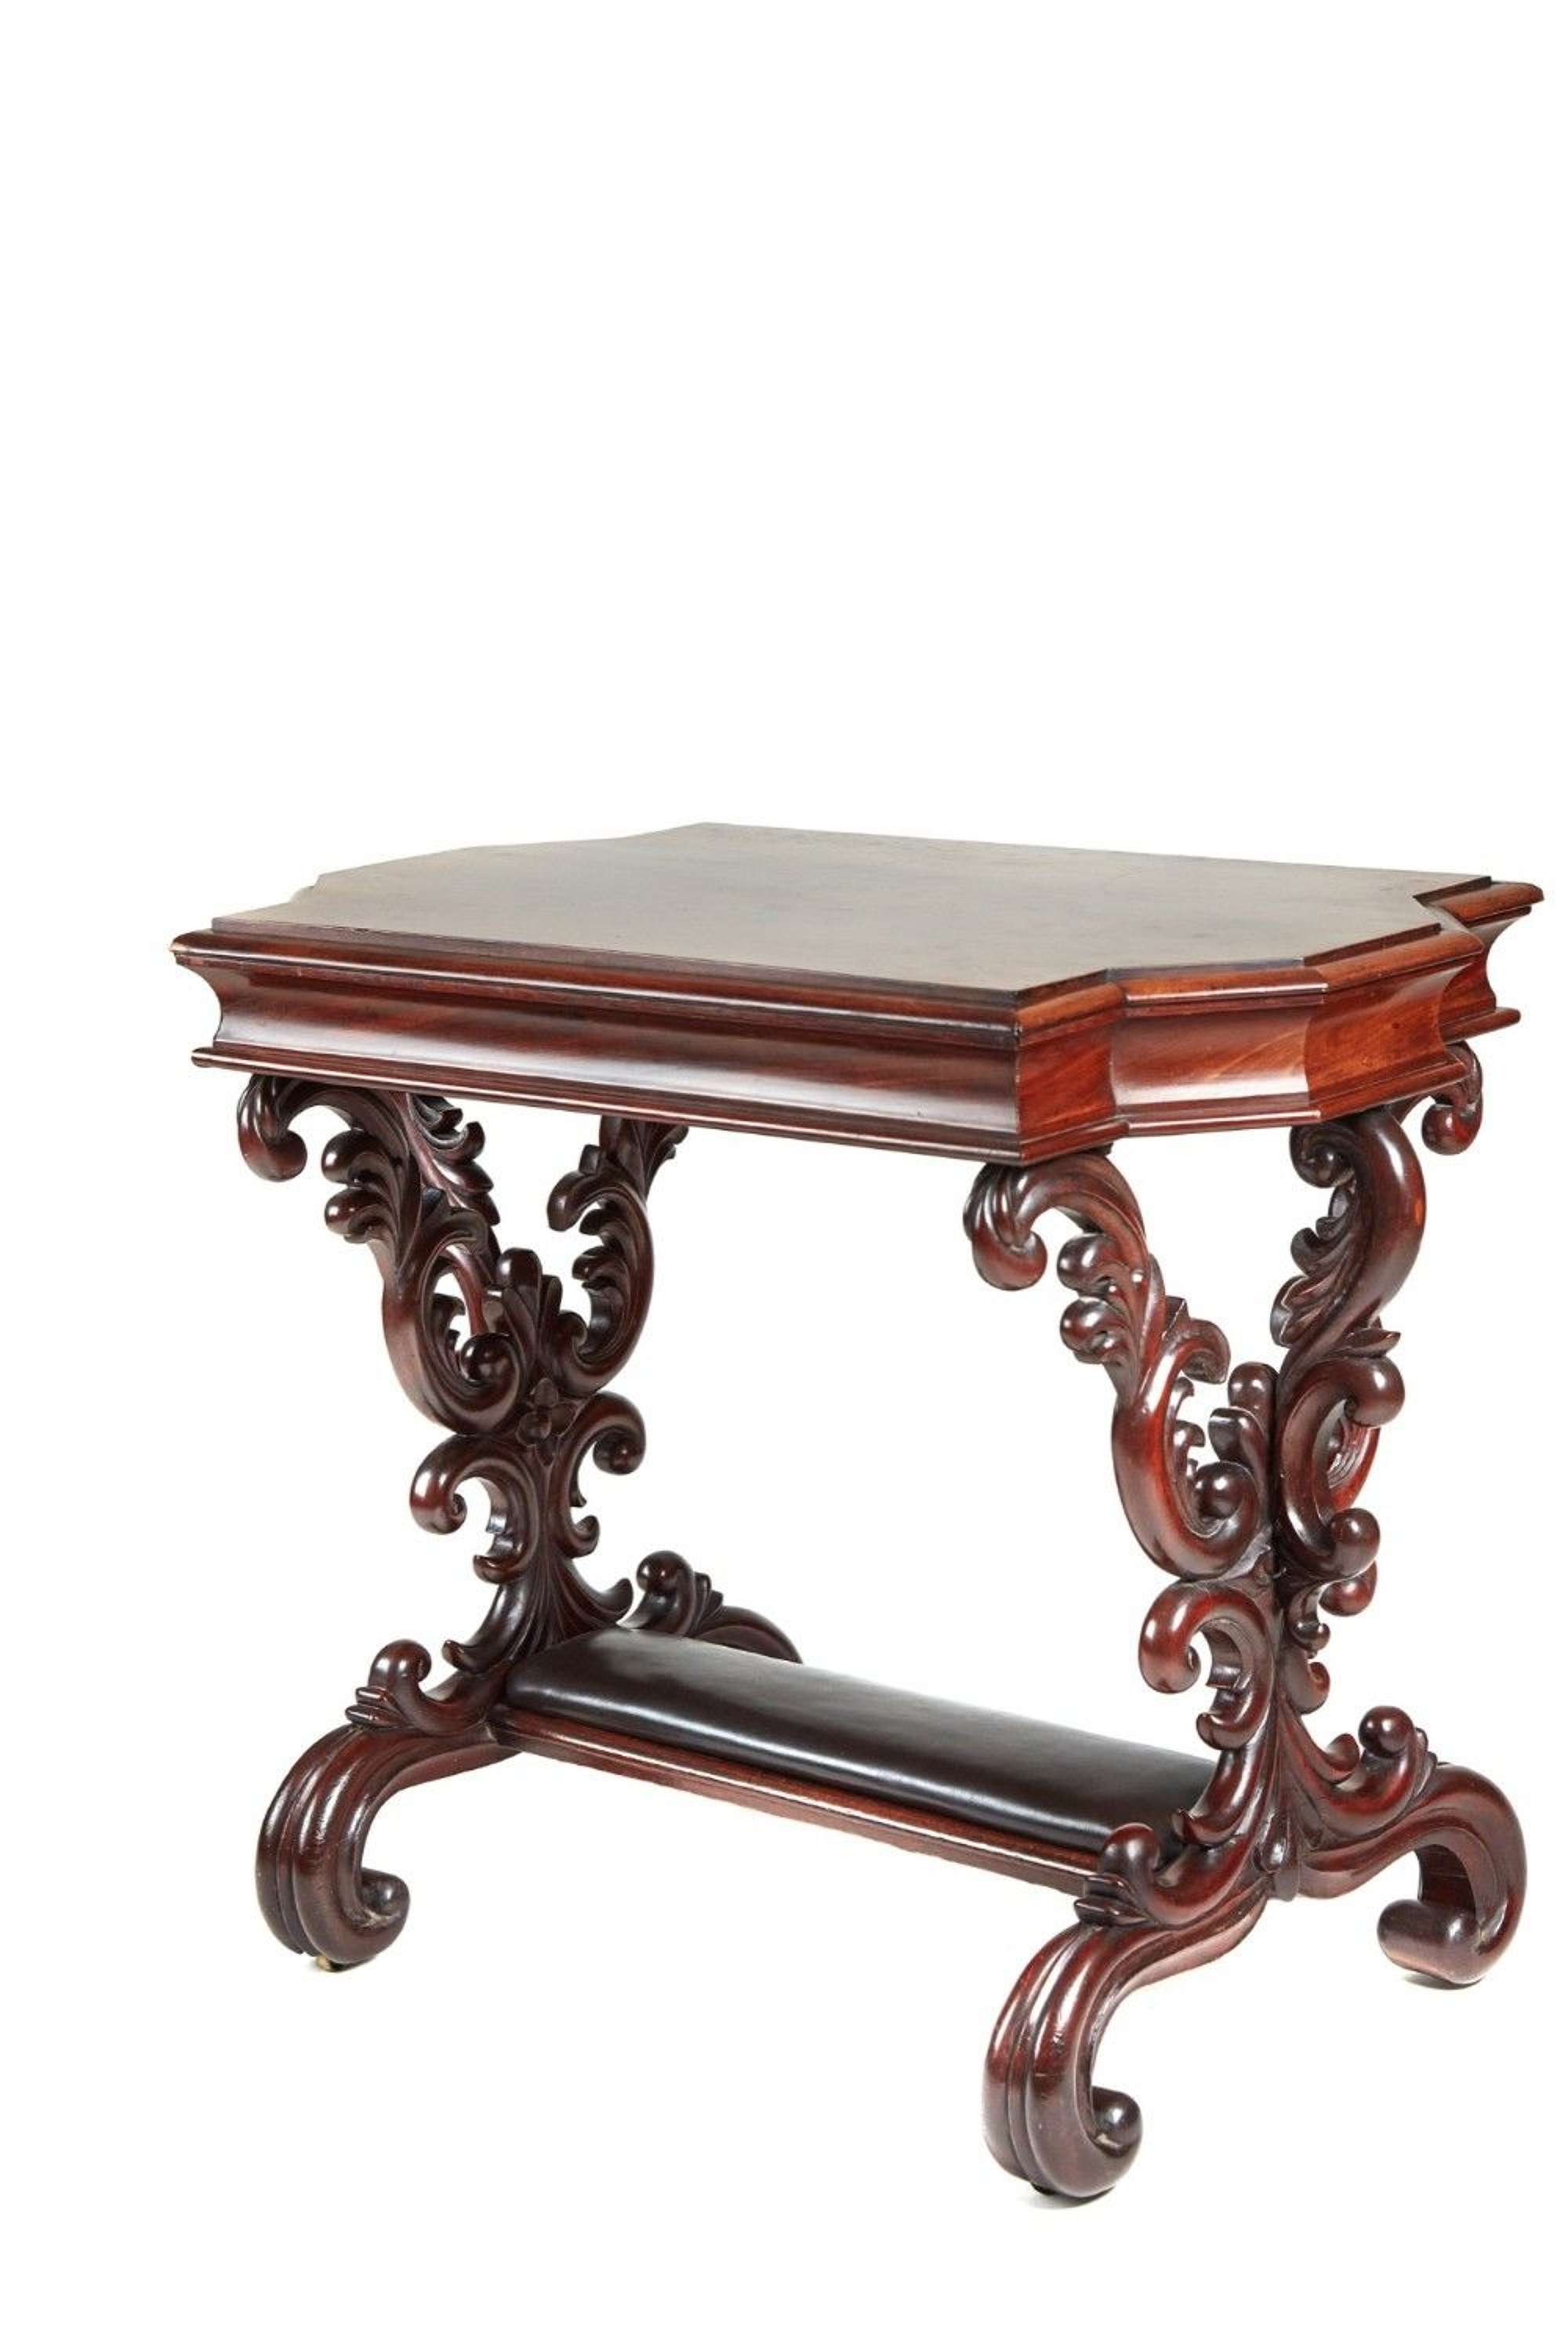 Outstanding Quality Carved Mahogany Centre Table C.1850